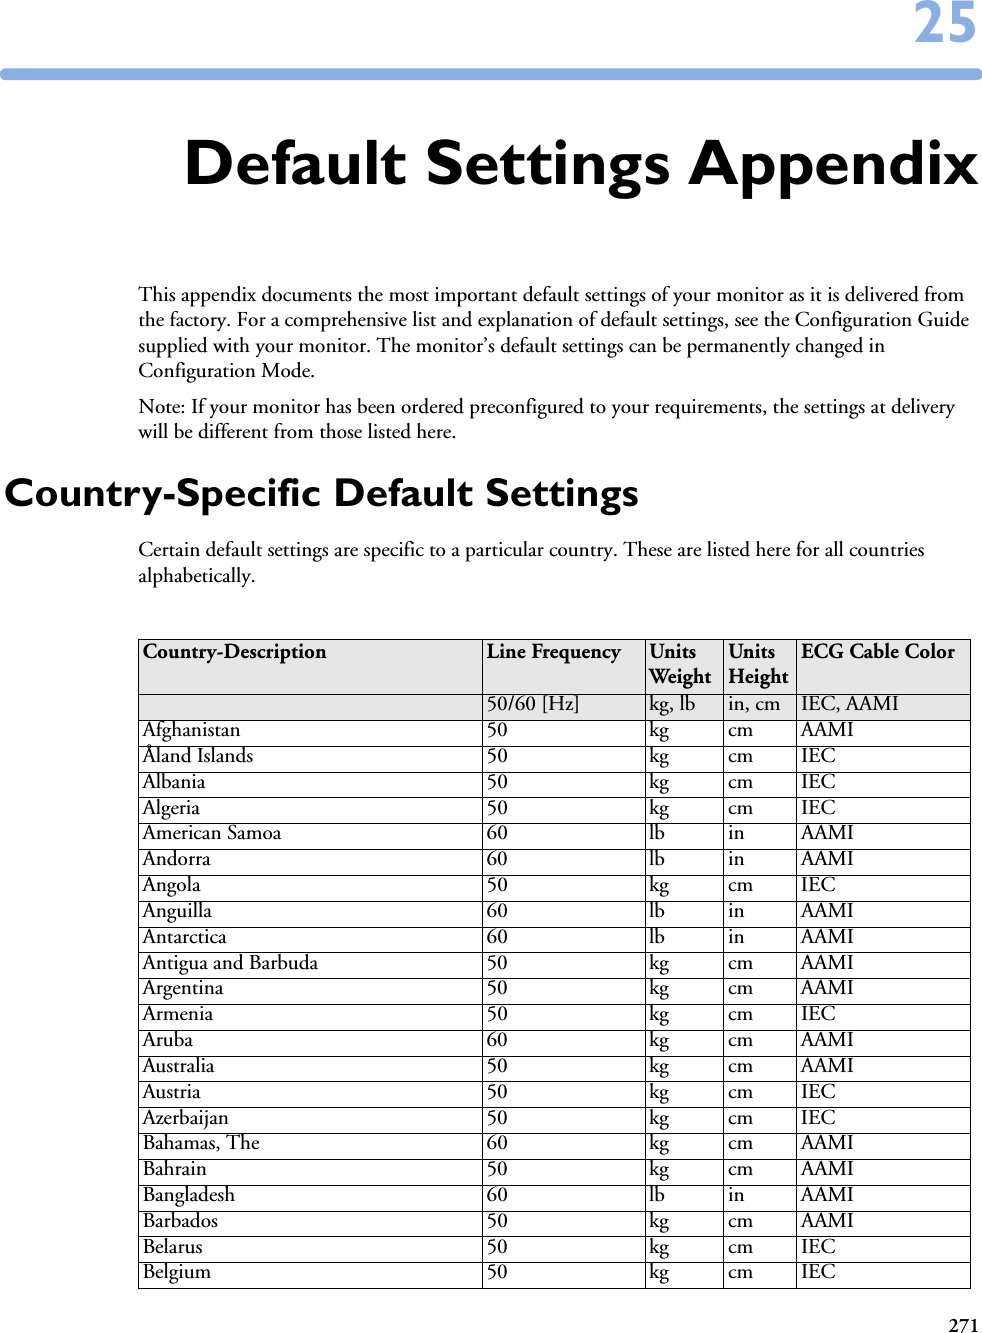 2712525Default Settings AppendixThis appendix documents the most important default settings of your monitor as it is delivered from the factory. For a comprehensive list and explanation of default settings, see the Configuration Guide supplied with your monitor. The monitor’s default settings can be permanently changed in Configuration Mode. Note: If your monitor has been ordered preconfigured to your requirements, the settings at delivery will be different from those listed here. Country-Specific Default SettingsCertain default settings are specific to a particular country. These are listed here for all countries alphabetically.Country-Description Line Frequency UnitsWeightUnitsHeightECG Cable Color50/60 [Hz] kg, lb in, cm IEC, AAMIAfghanistan 50 kg cm AAMIÅland Islands 50 kg cm IECAlbania 50 kg cm IECAlgeria 50 kg cm IECAmerican Samoa 60 lb in AAMIAndorra 60 lb in AAMIAngola 50 kg cm IECAnguilla 60 lb in AAMIAntarctica 60 lb in AAMIAntigua and Barbuda 50 kg cm AAMIArgentina 50 kg cm AAMIArmenia 50 kg cm IECAruba 60 kg cm AAMIAustralia 50 kg cm AAMIAustria 50 kg cm IECAzerbaijan 50 kg cm IECBahamas, The 60 kg cm AAMIBahrain 50 kg cm AAMIBangladesh 60 lb in AAMIBarbados 50 kg cm AAMIBelarus 50 kg cm IECBelgium 50 kg cm IEC